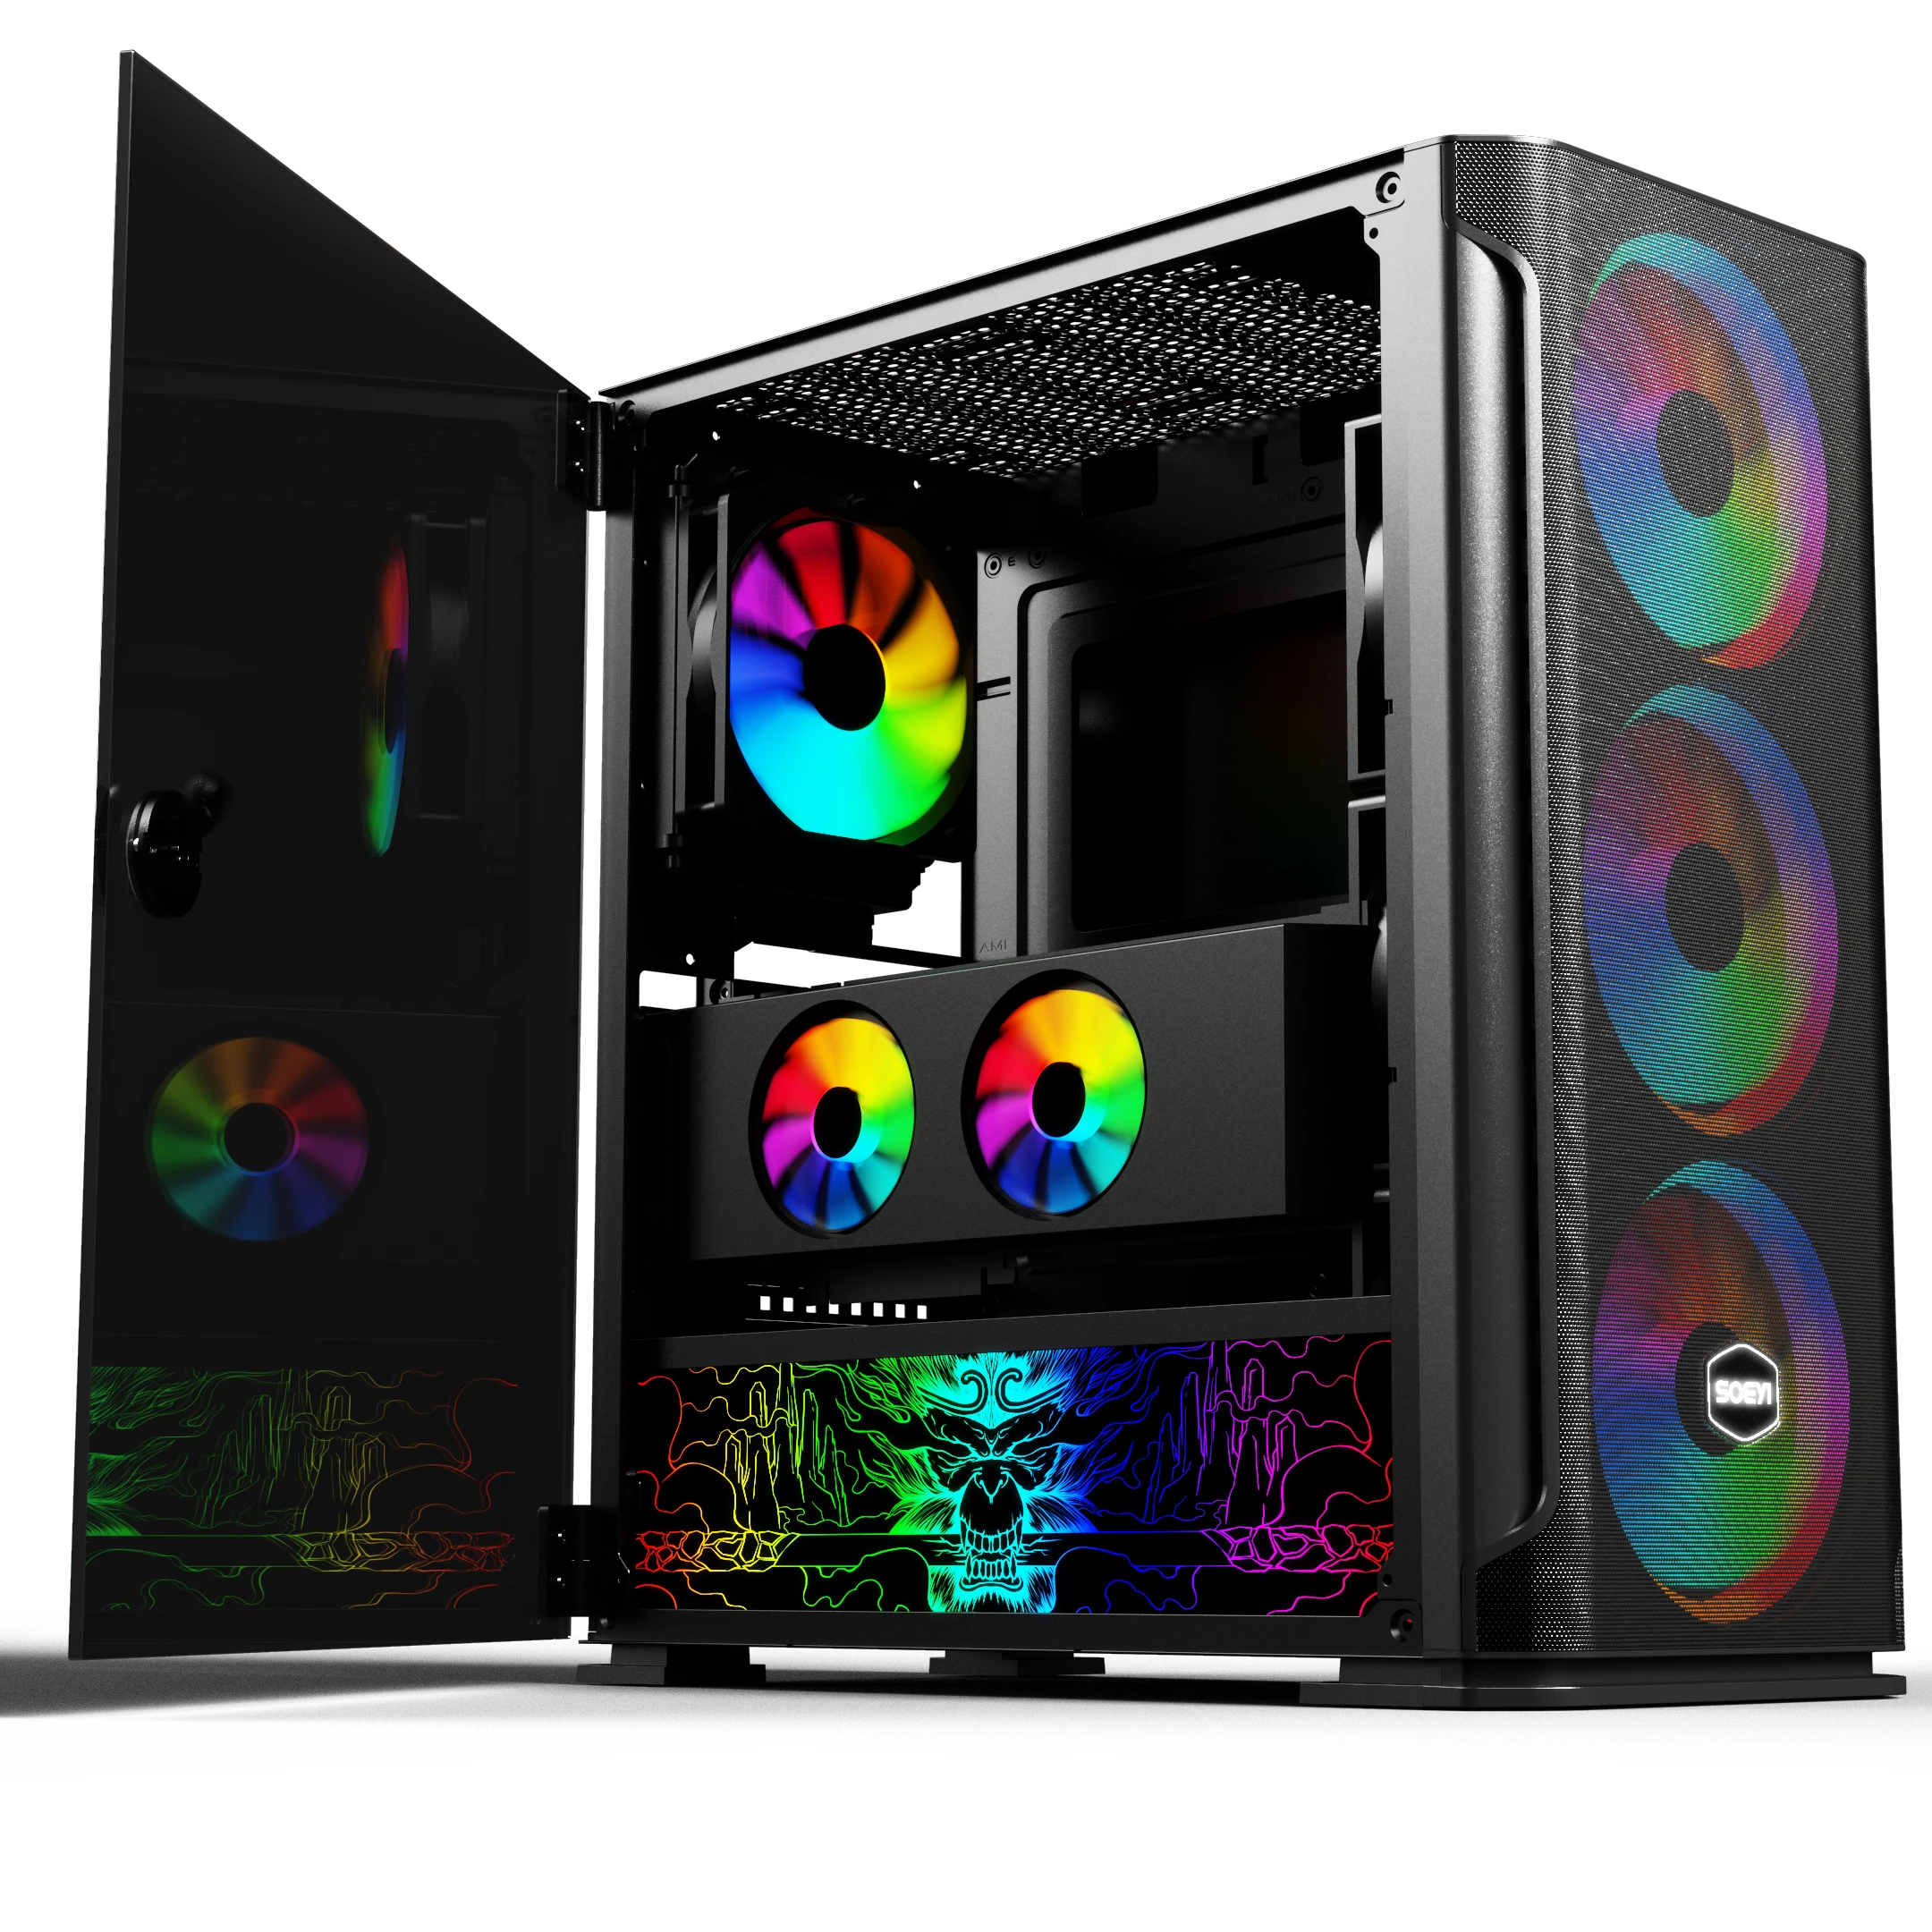 Hot Selling Factory OEM Desktop Case Gamer EATX PC Case Gaming Computer Gaming Case With RGB Fan